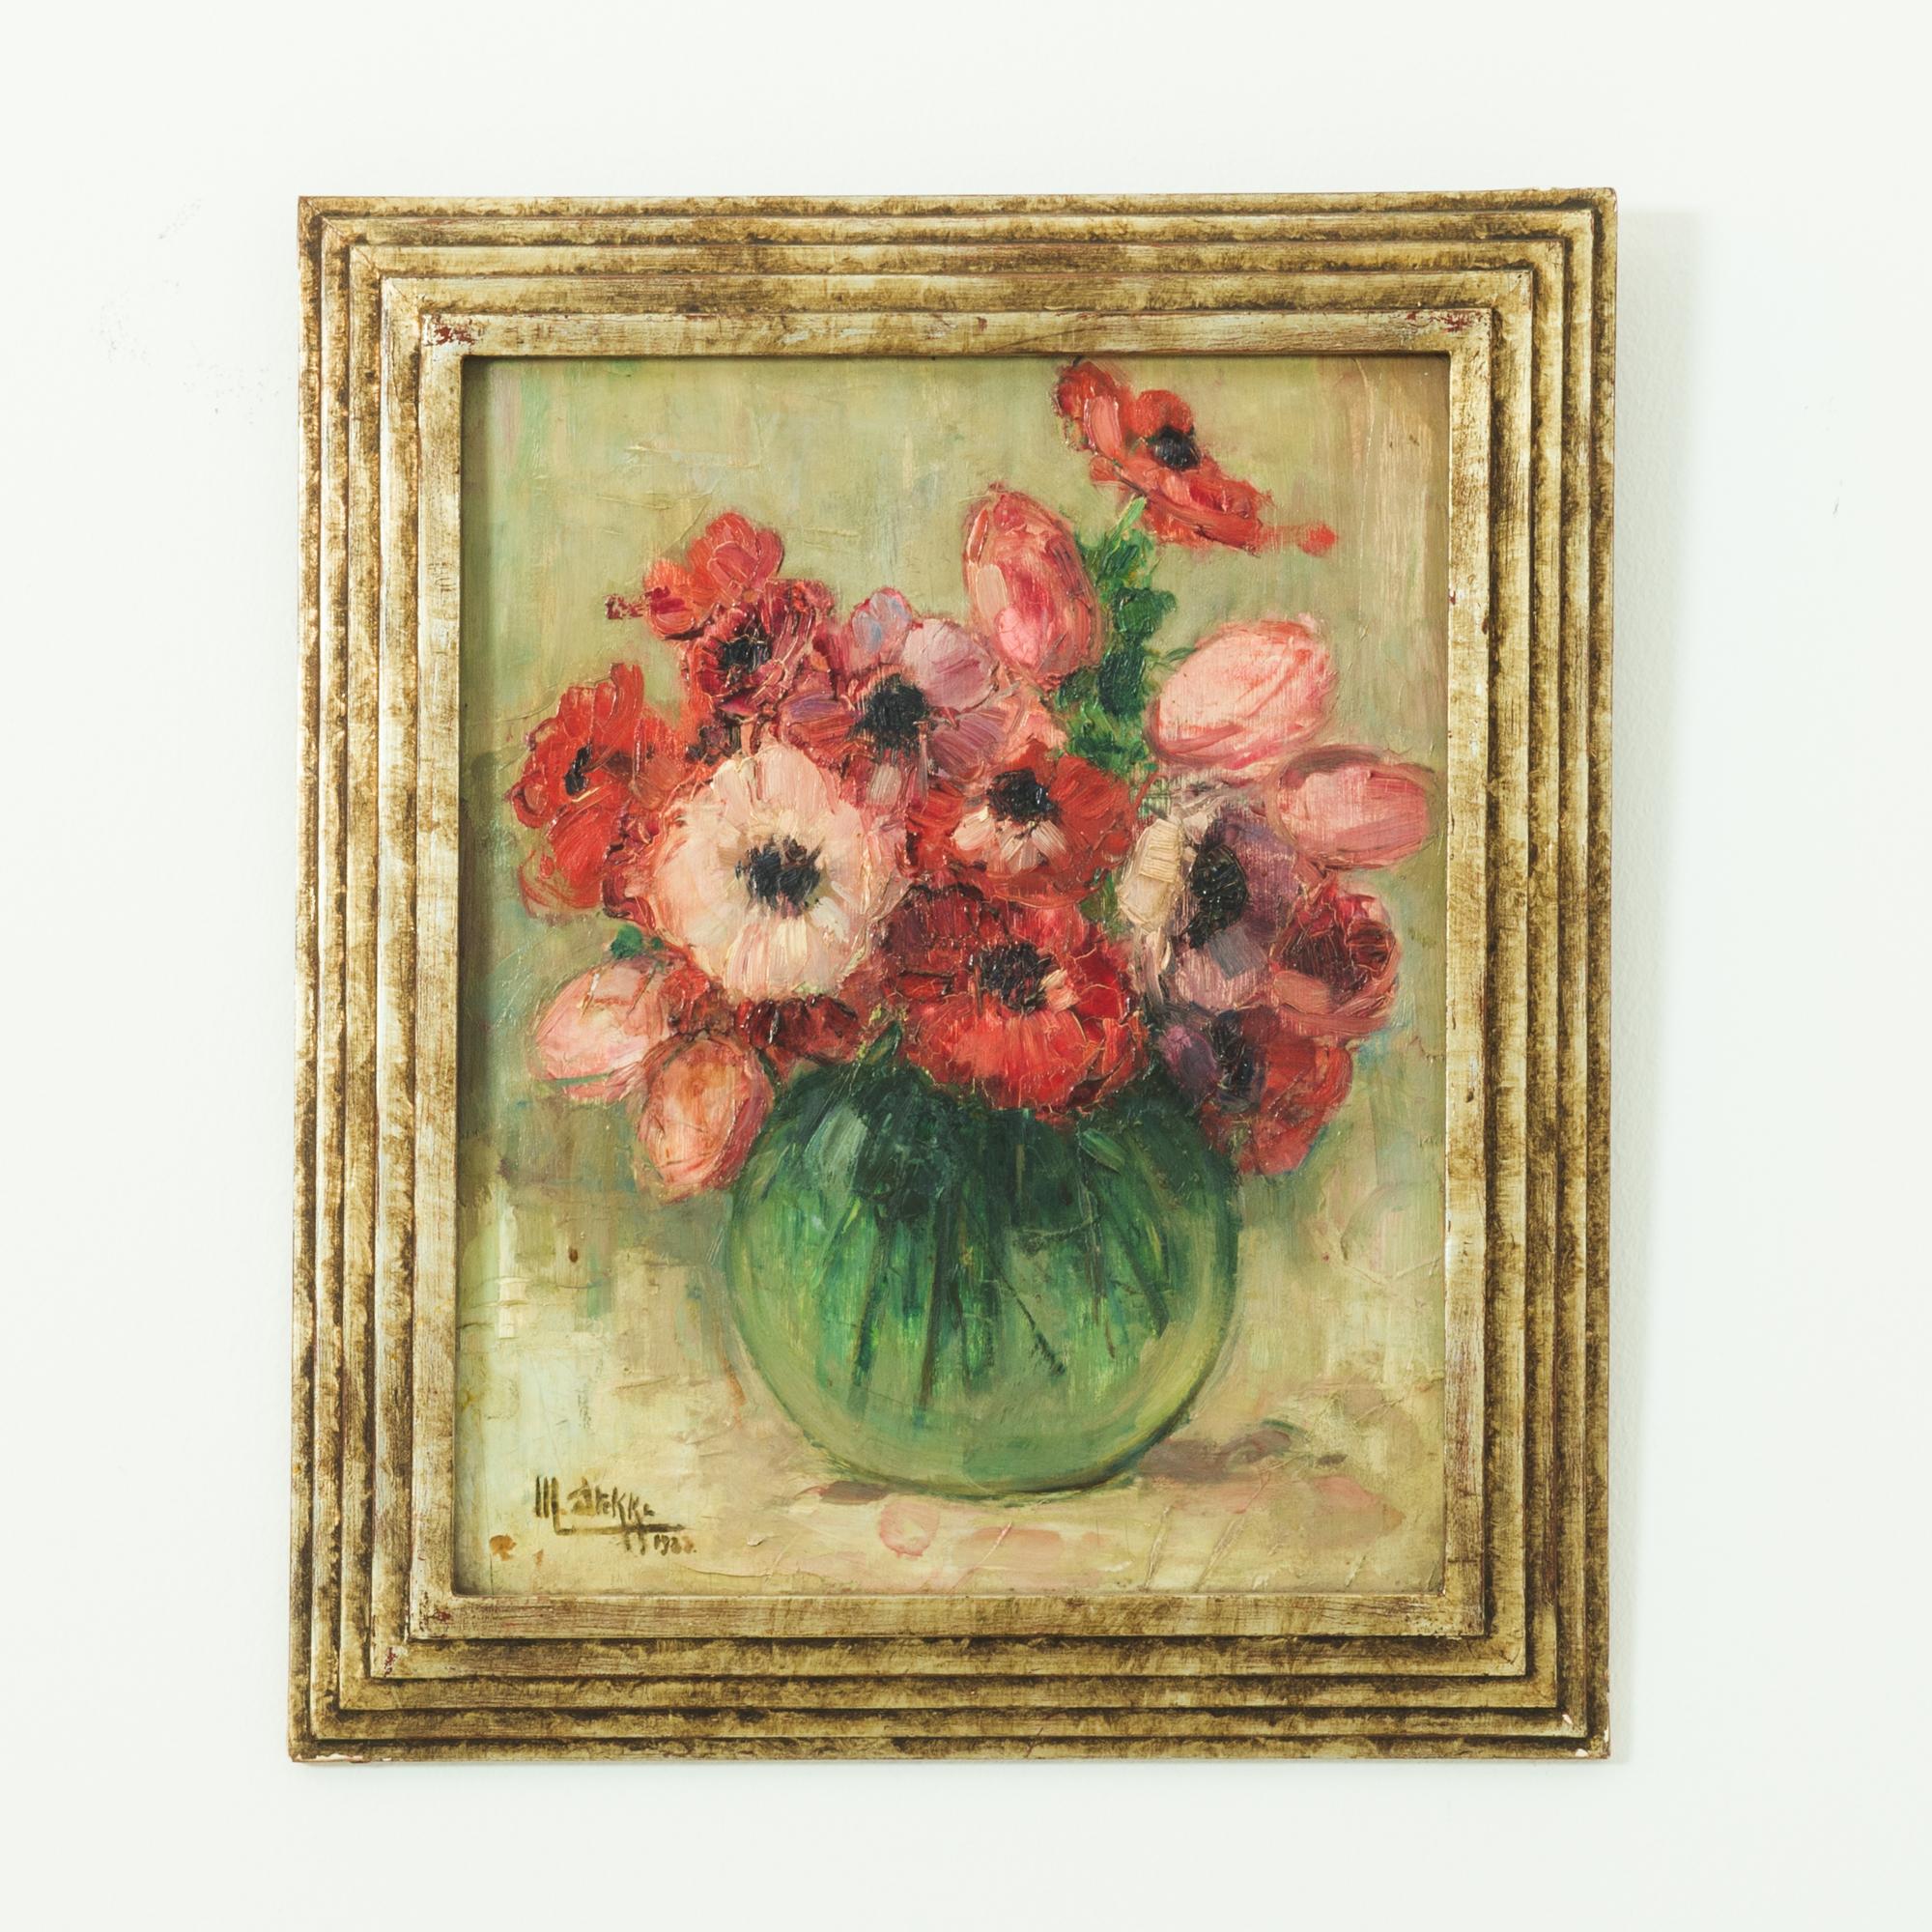 A floral study with gilded frame from France, circa 1880. A still life of tulips in a glass vase is rendered in a thick impasto, signed “M. Arekke” The painting is highlighted by a geometric gilded frame.